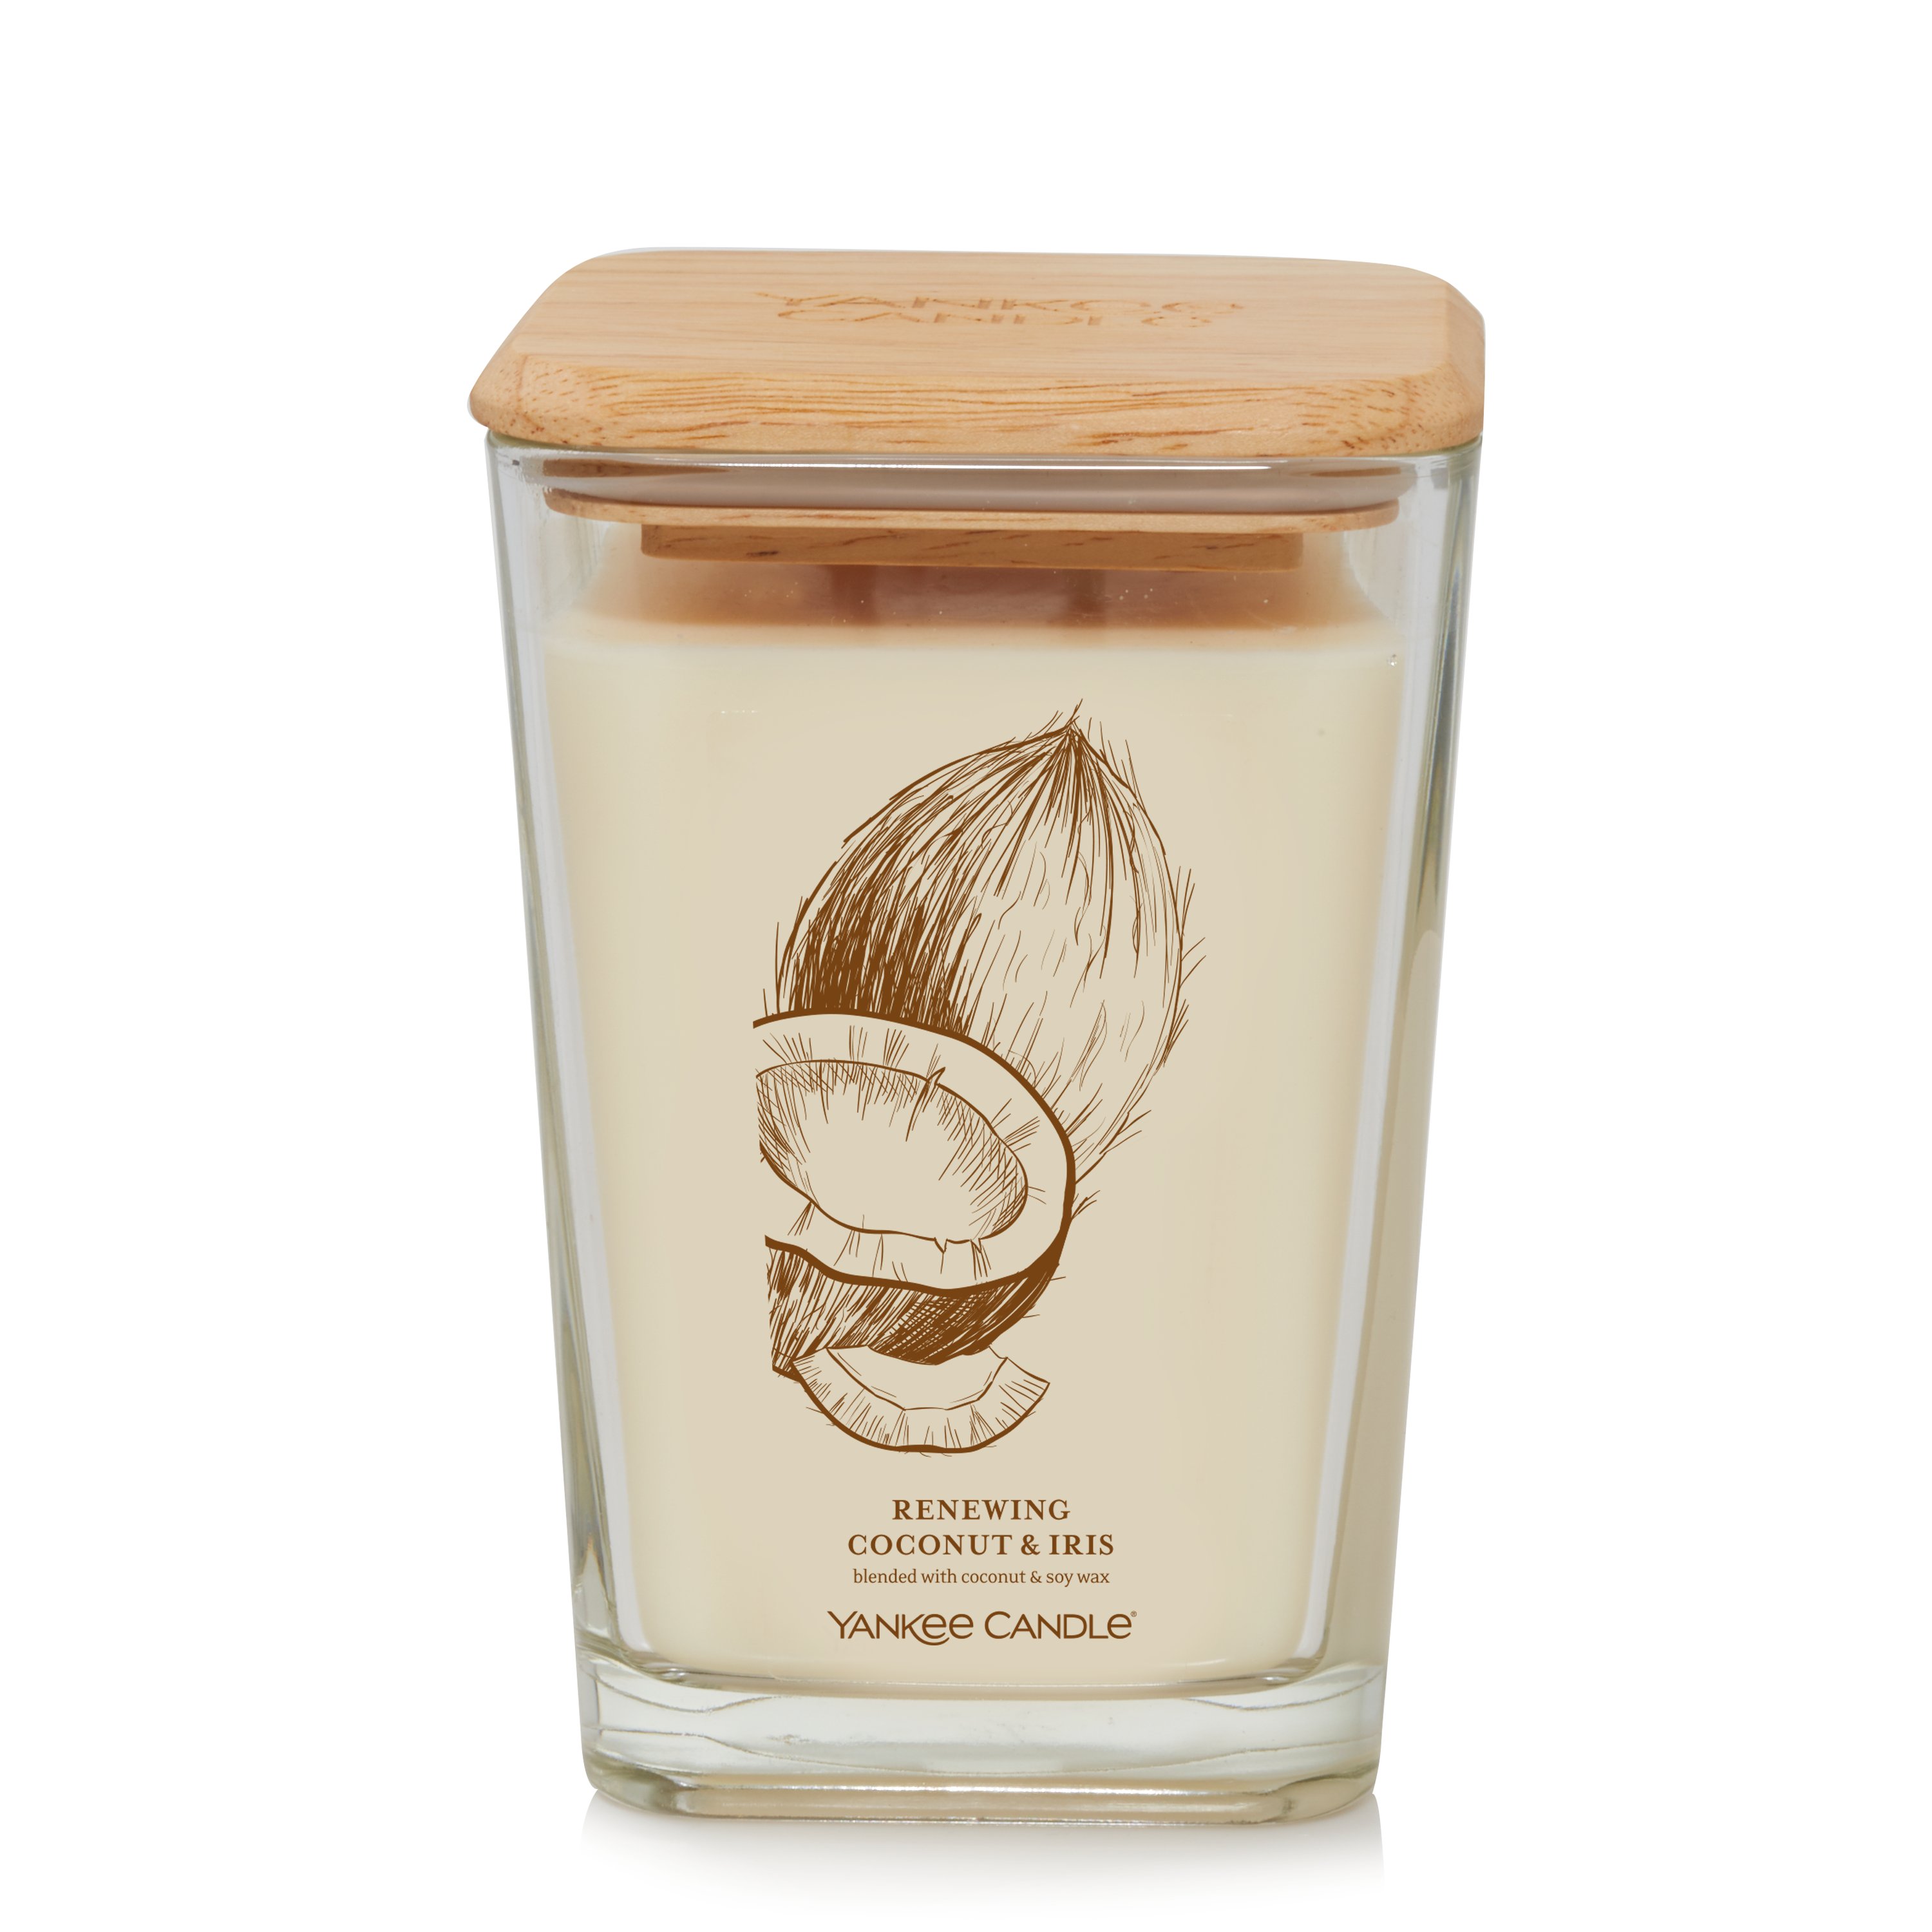 Renewing Coconut & Iris Well Living Large Square Candle - Large 